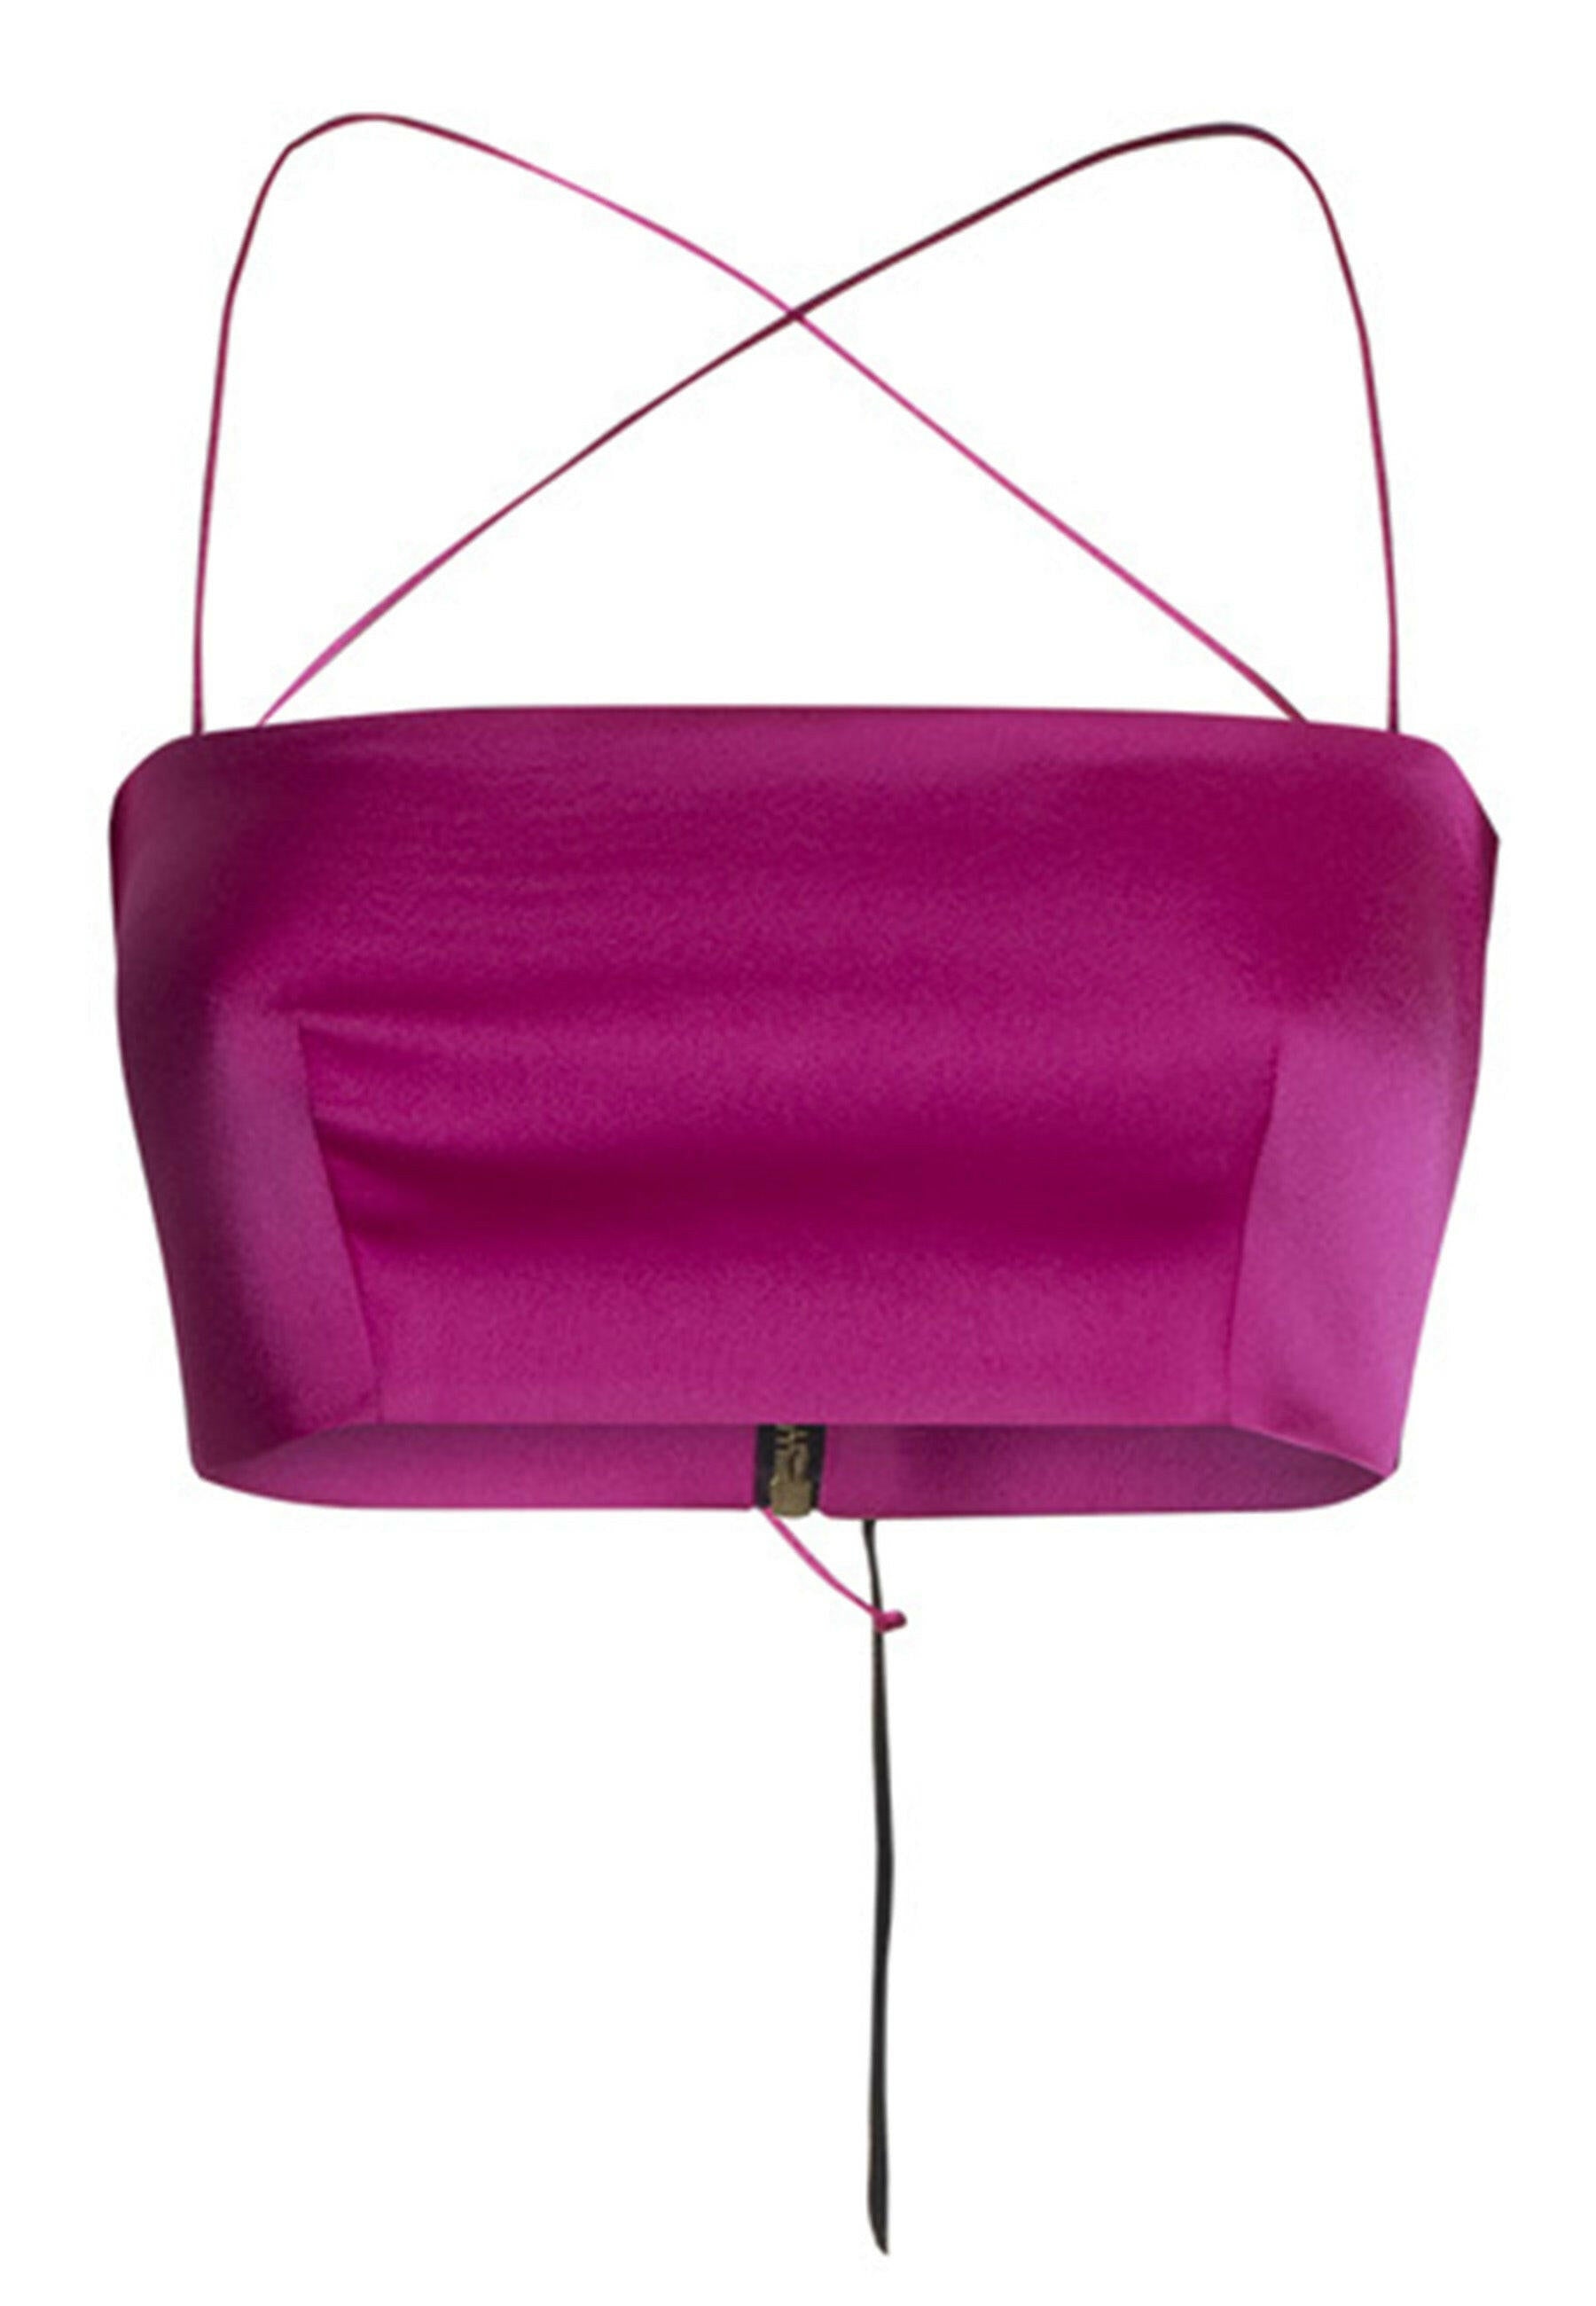 Women's crop top in fuchsia fabric with crossed straps